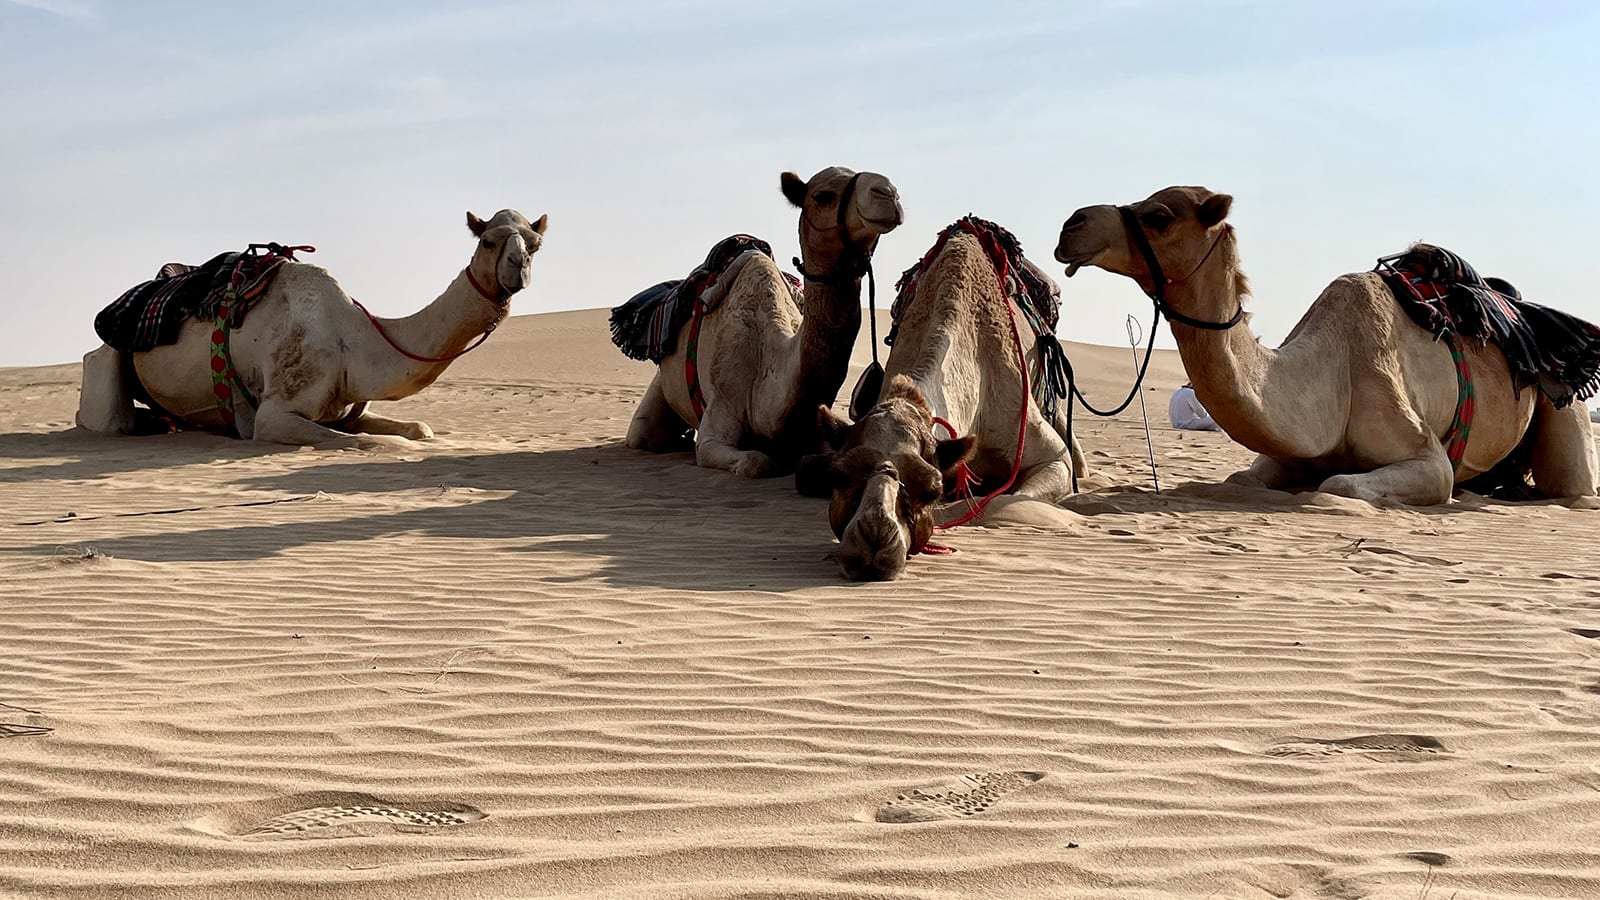 Women lead the way at Dubai's first camel riding school